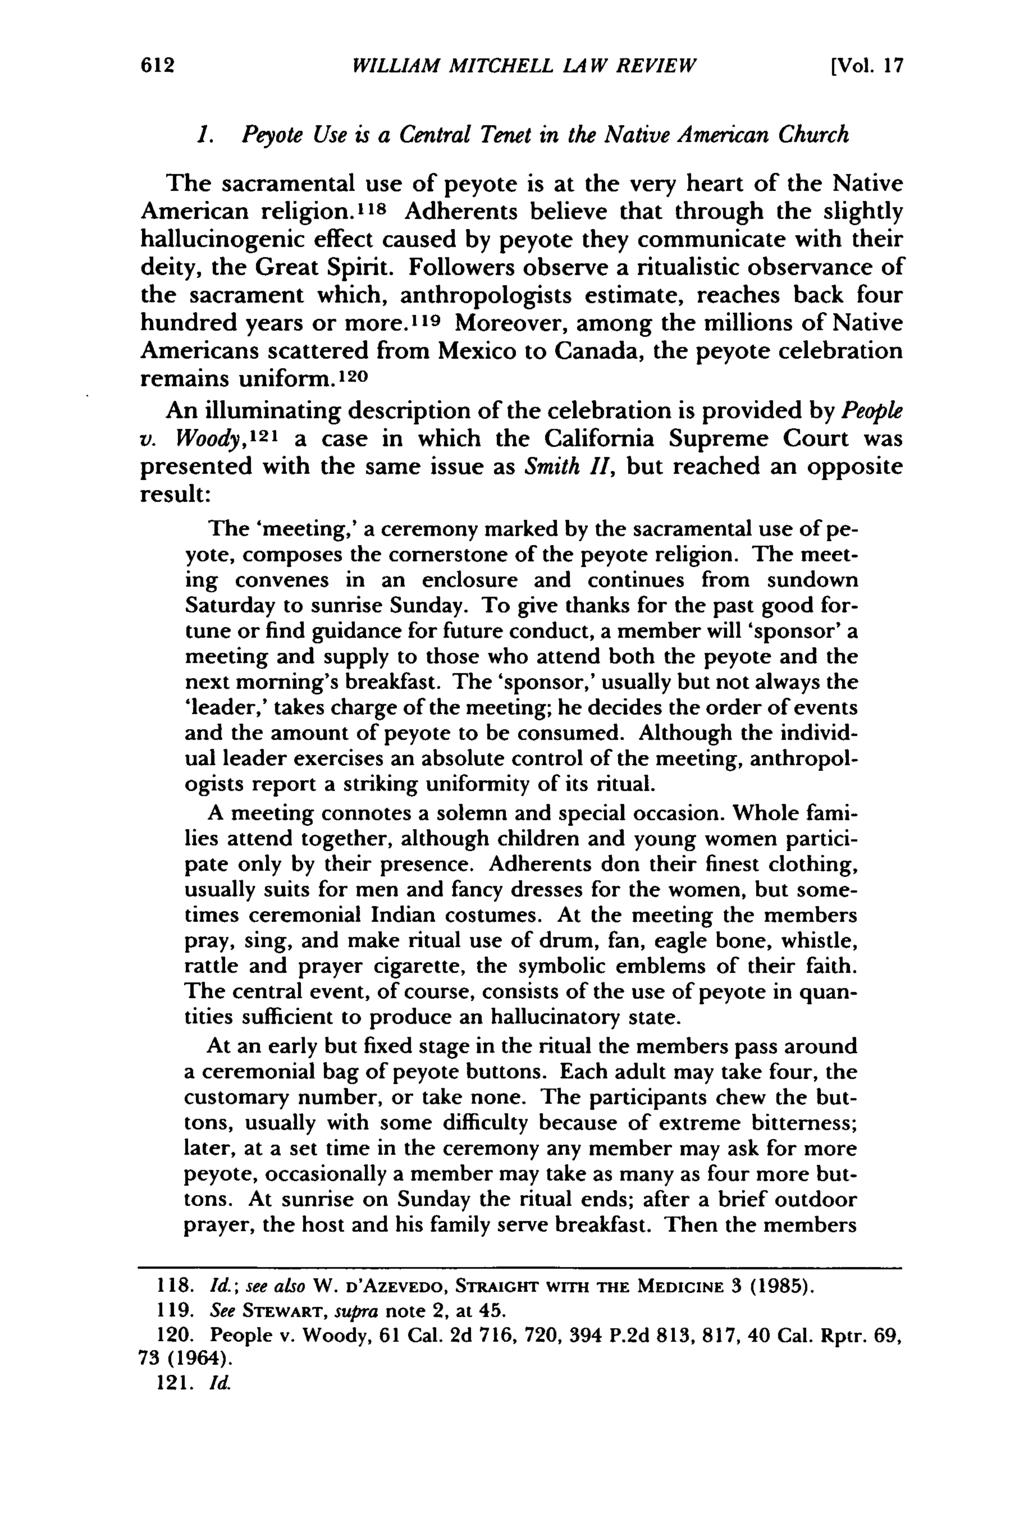 William Mitchell WILLIAM Law MITCHELL Review, Vol. 17, LAW Iss. 2 [1991], REVIEW Art. 16 [Vol. 17 1.